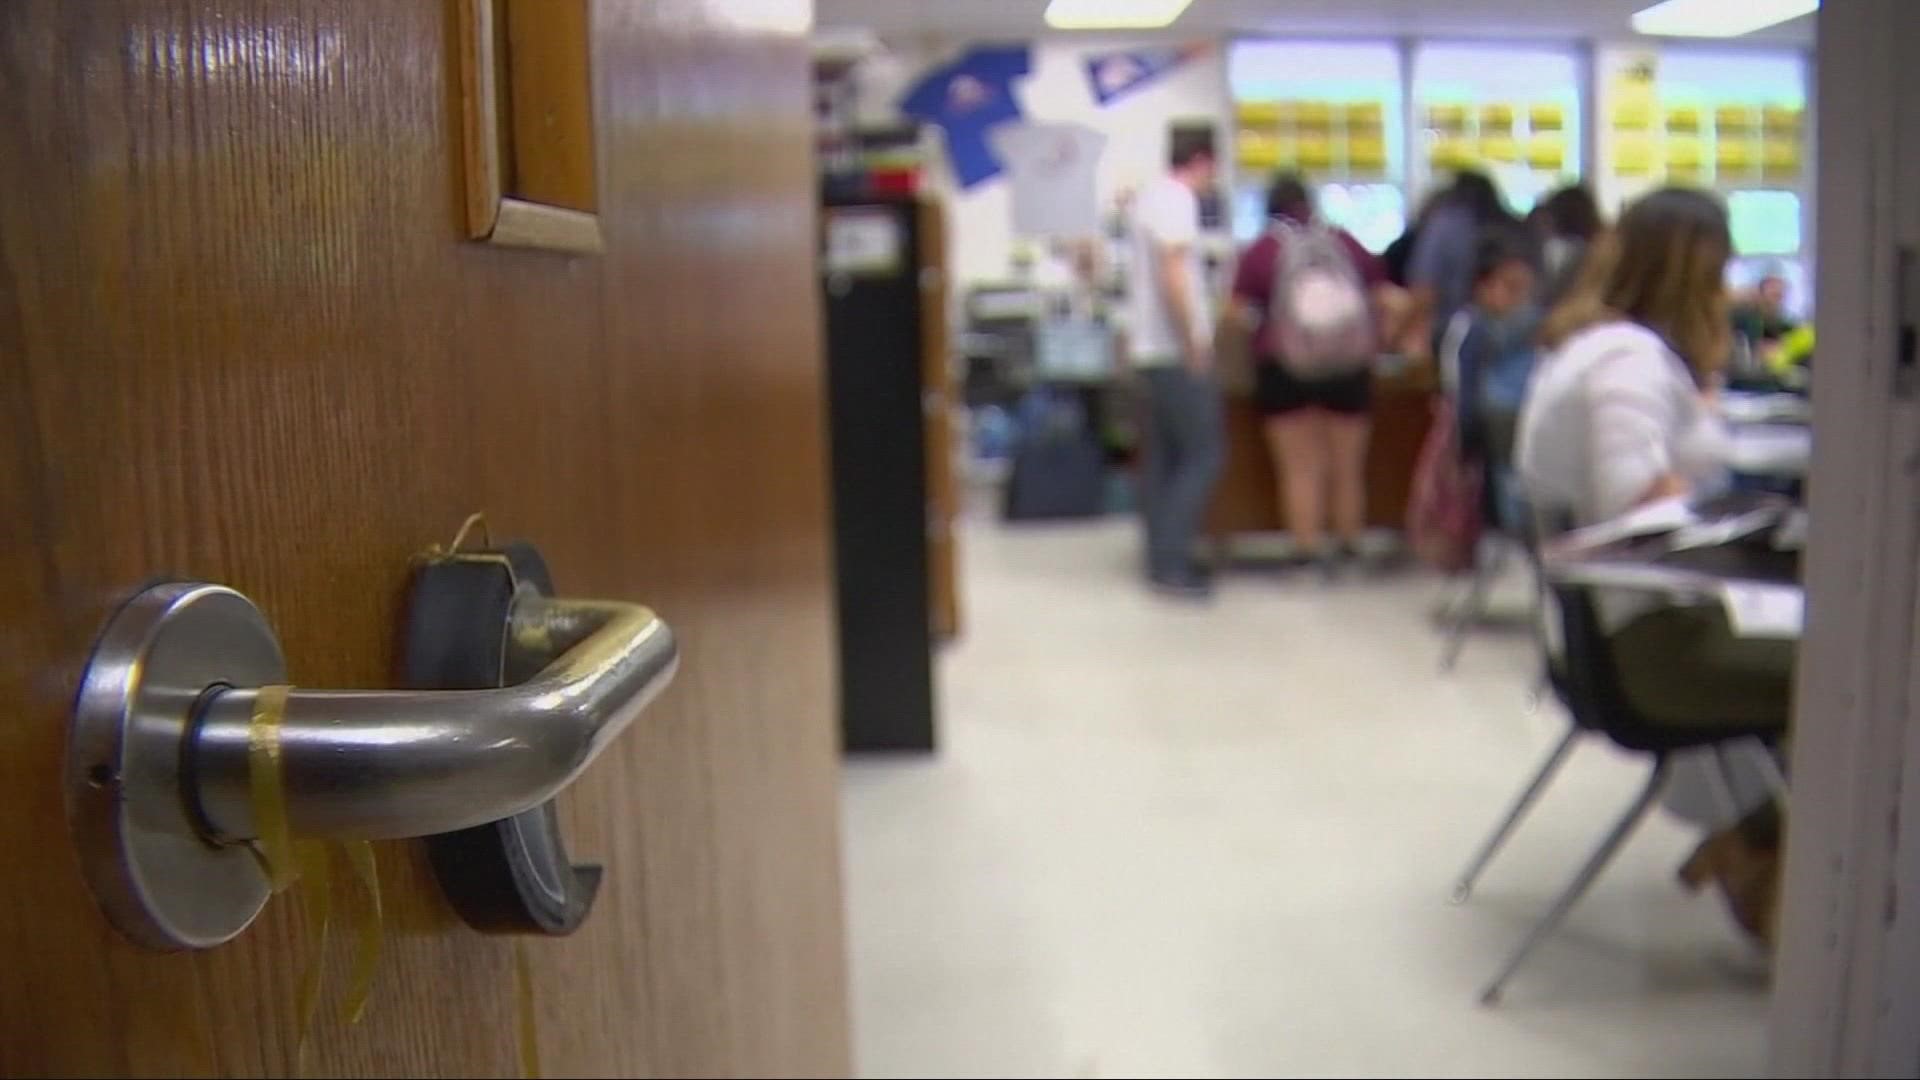 A shortage of teachers is impacting schools in Ohio, as well as across the country ahead of the new year.